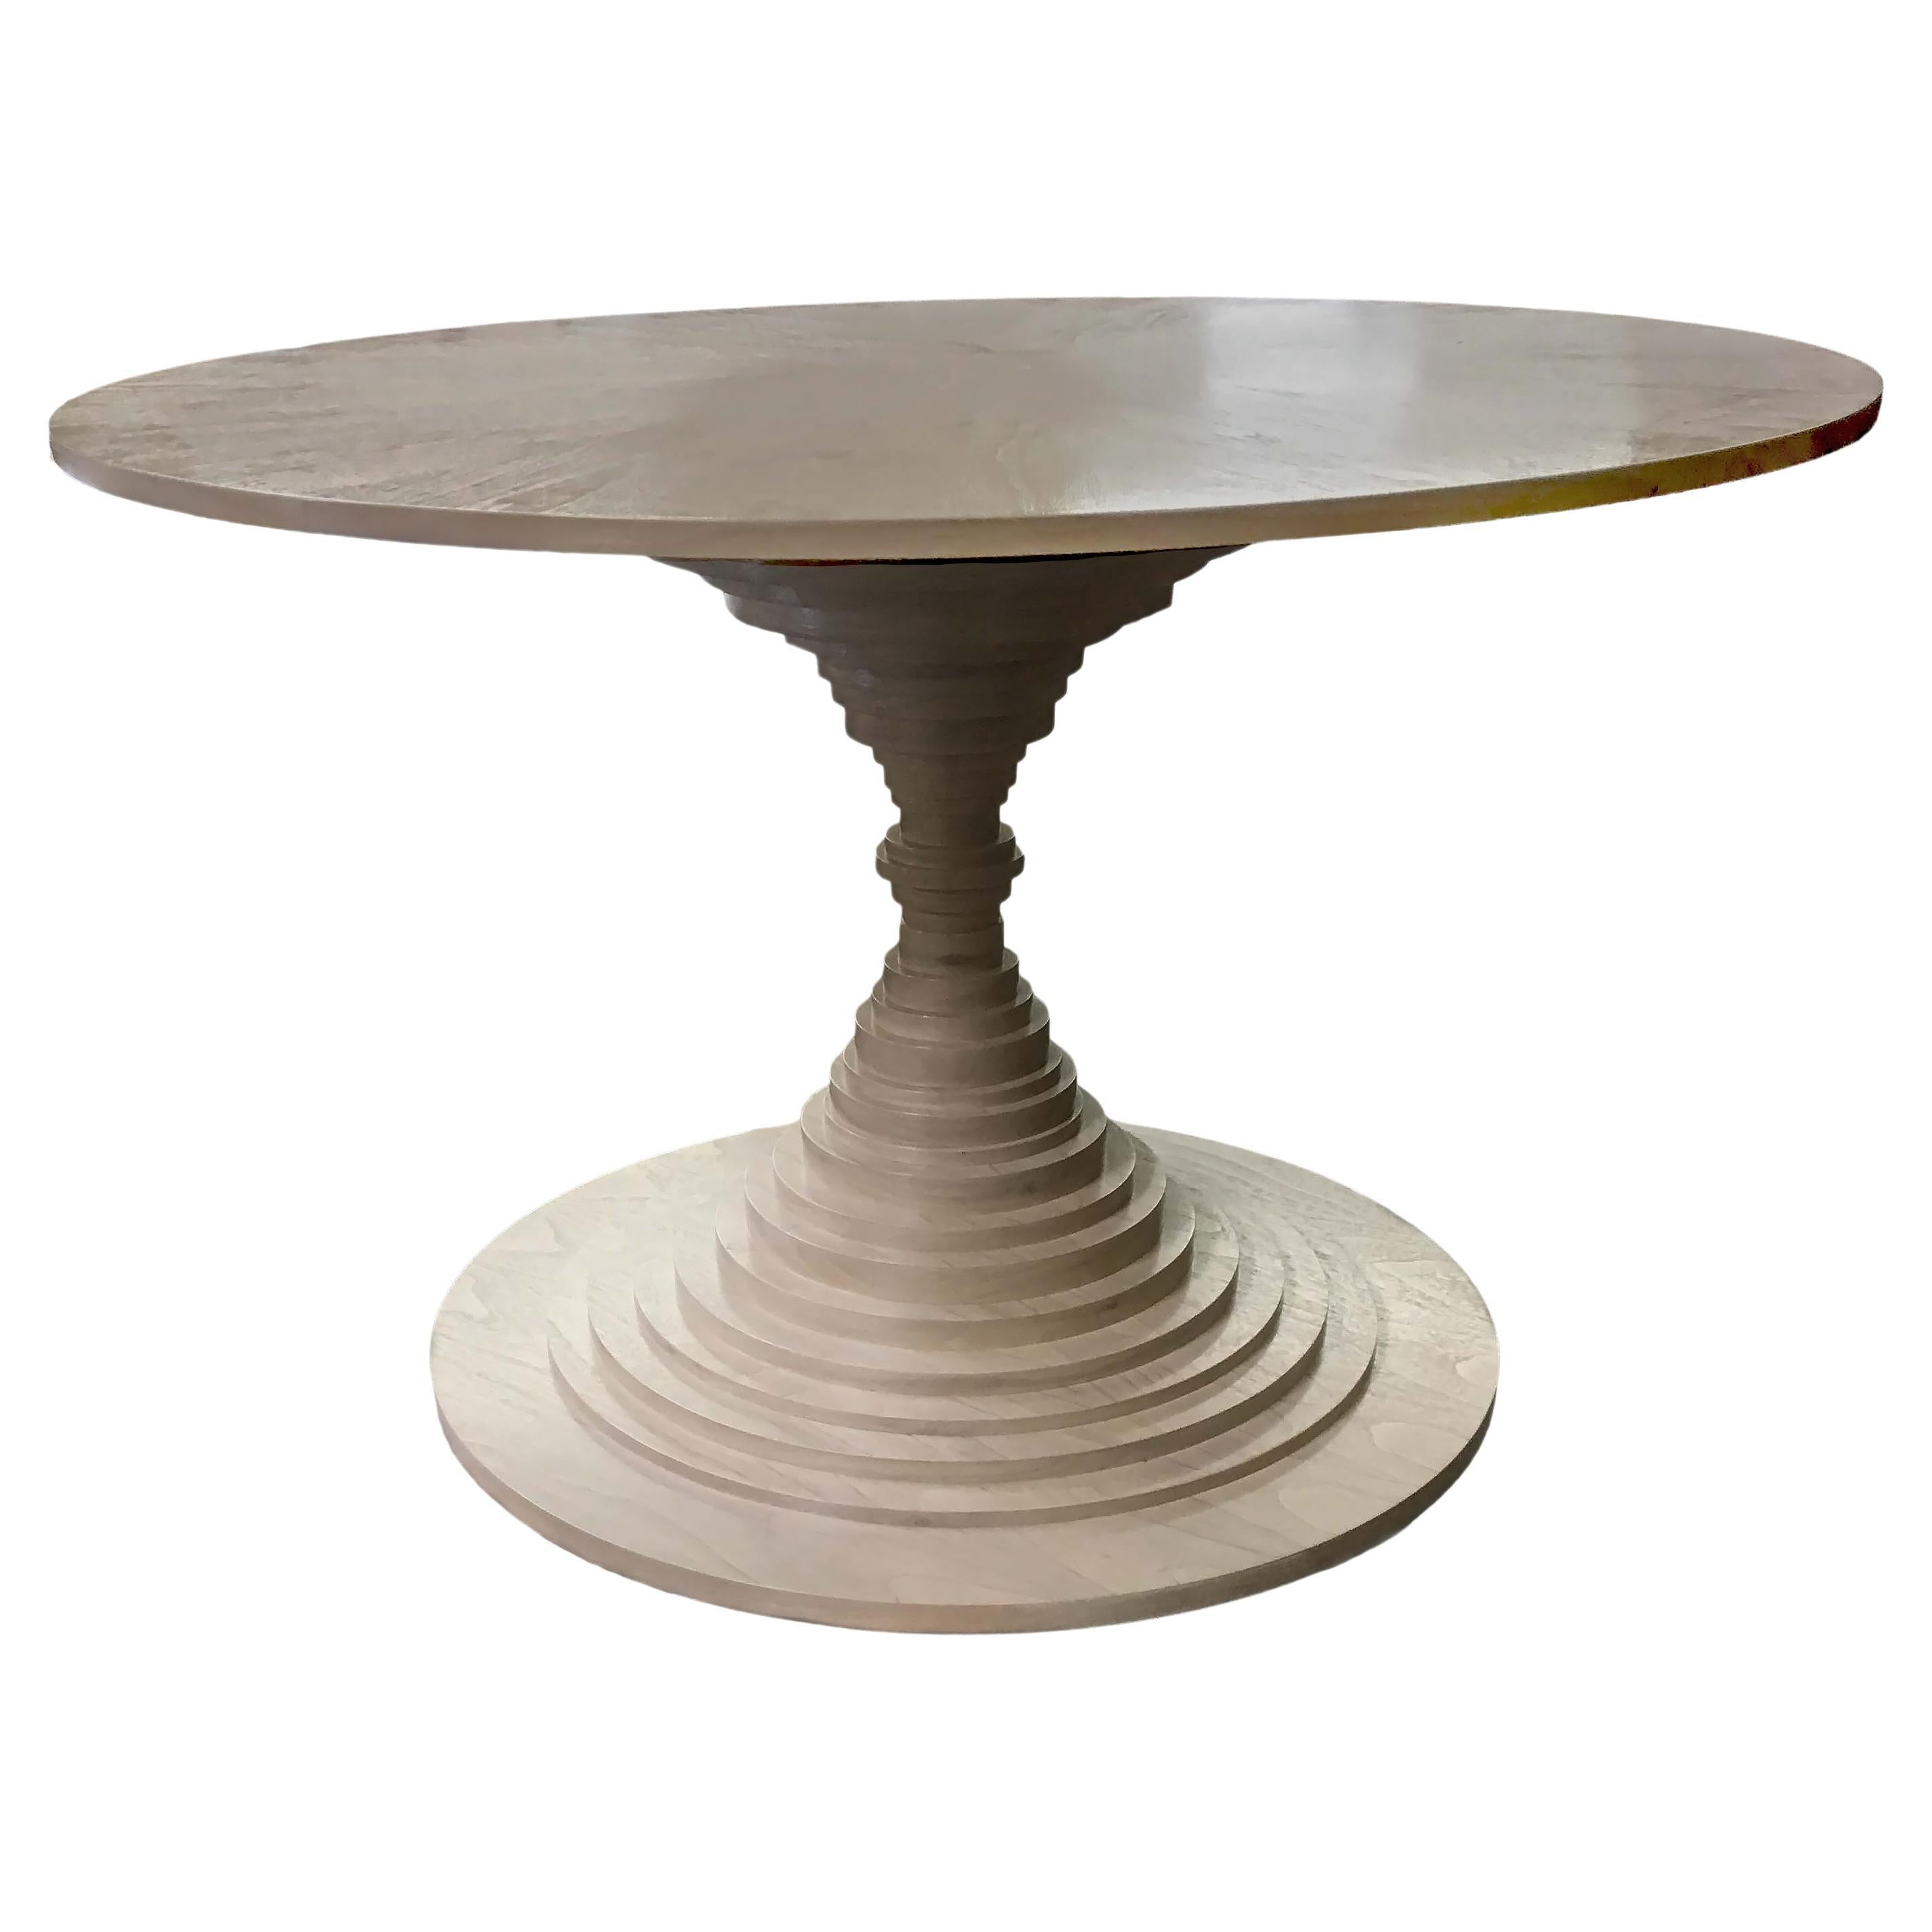 Bleached Walnut Dining Table with Stacked Discs